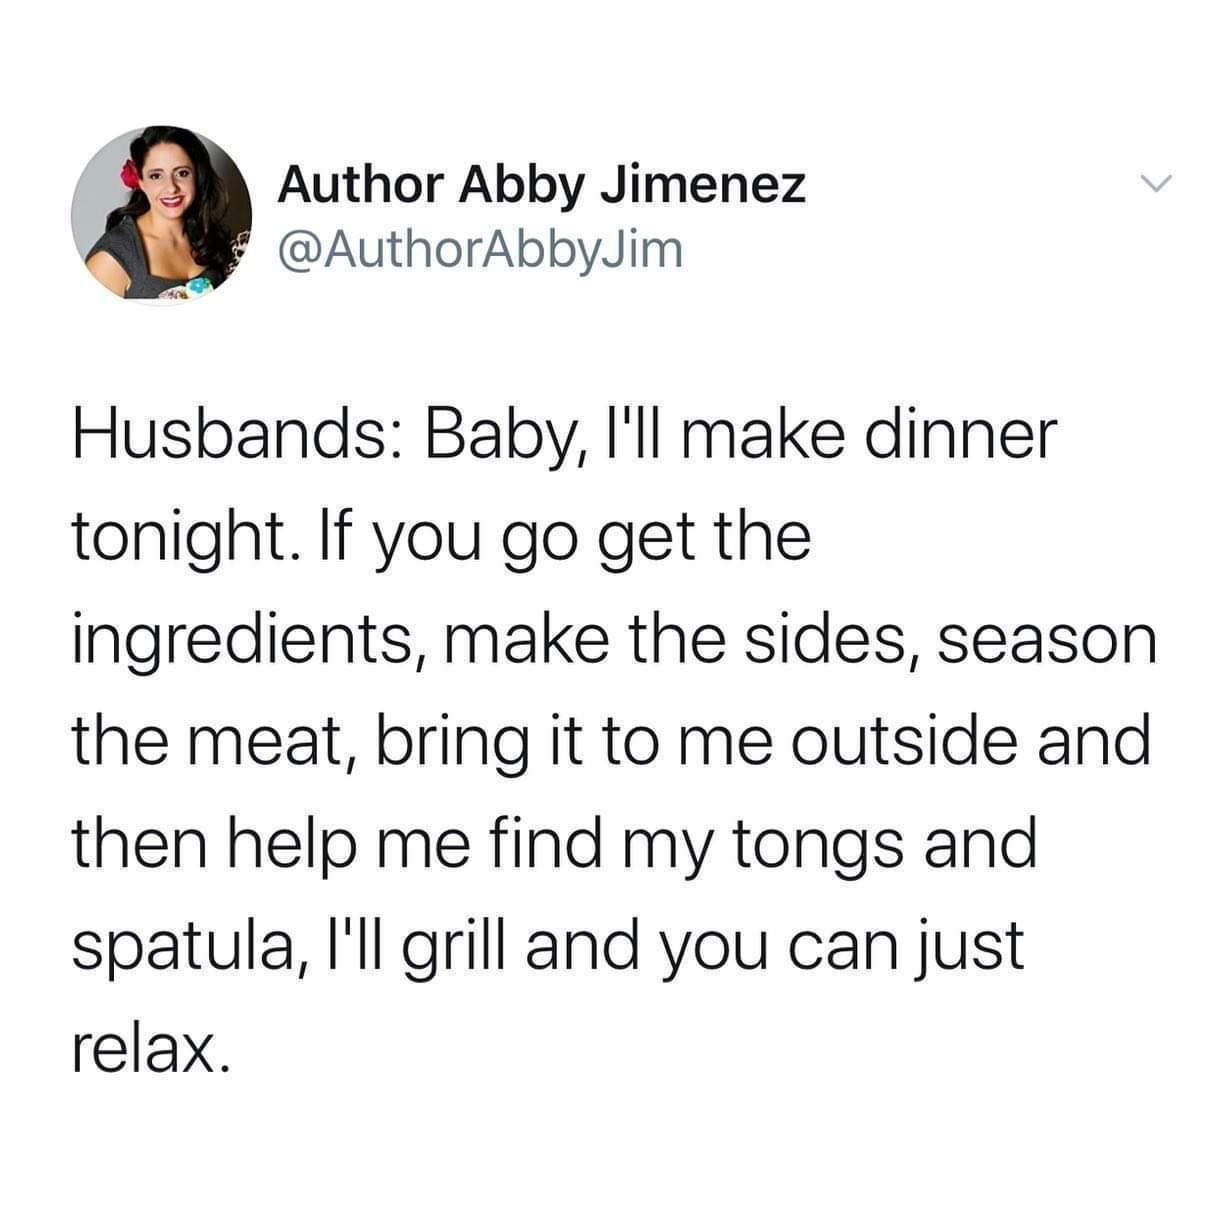 Monday Morning Randomness - husbands i ll make dinner tonight - Author Abby Jimenez Jim Husbands Baby, I'll make dinner tonight. If you go get the ingredients, make the sides, season the meat, bring it to me outside and then help me find my tongs and spat